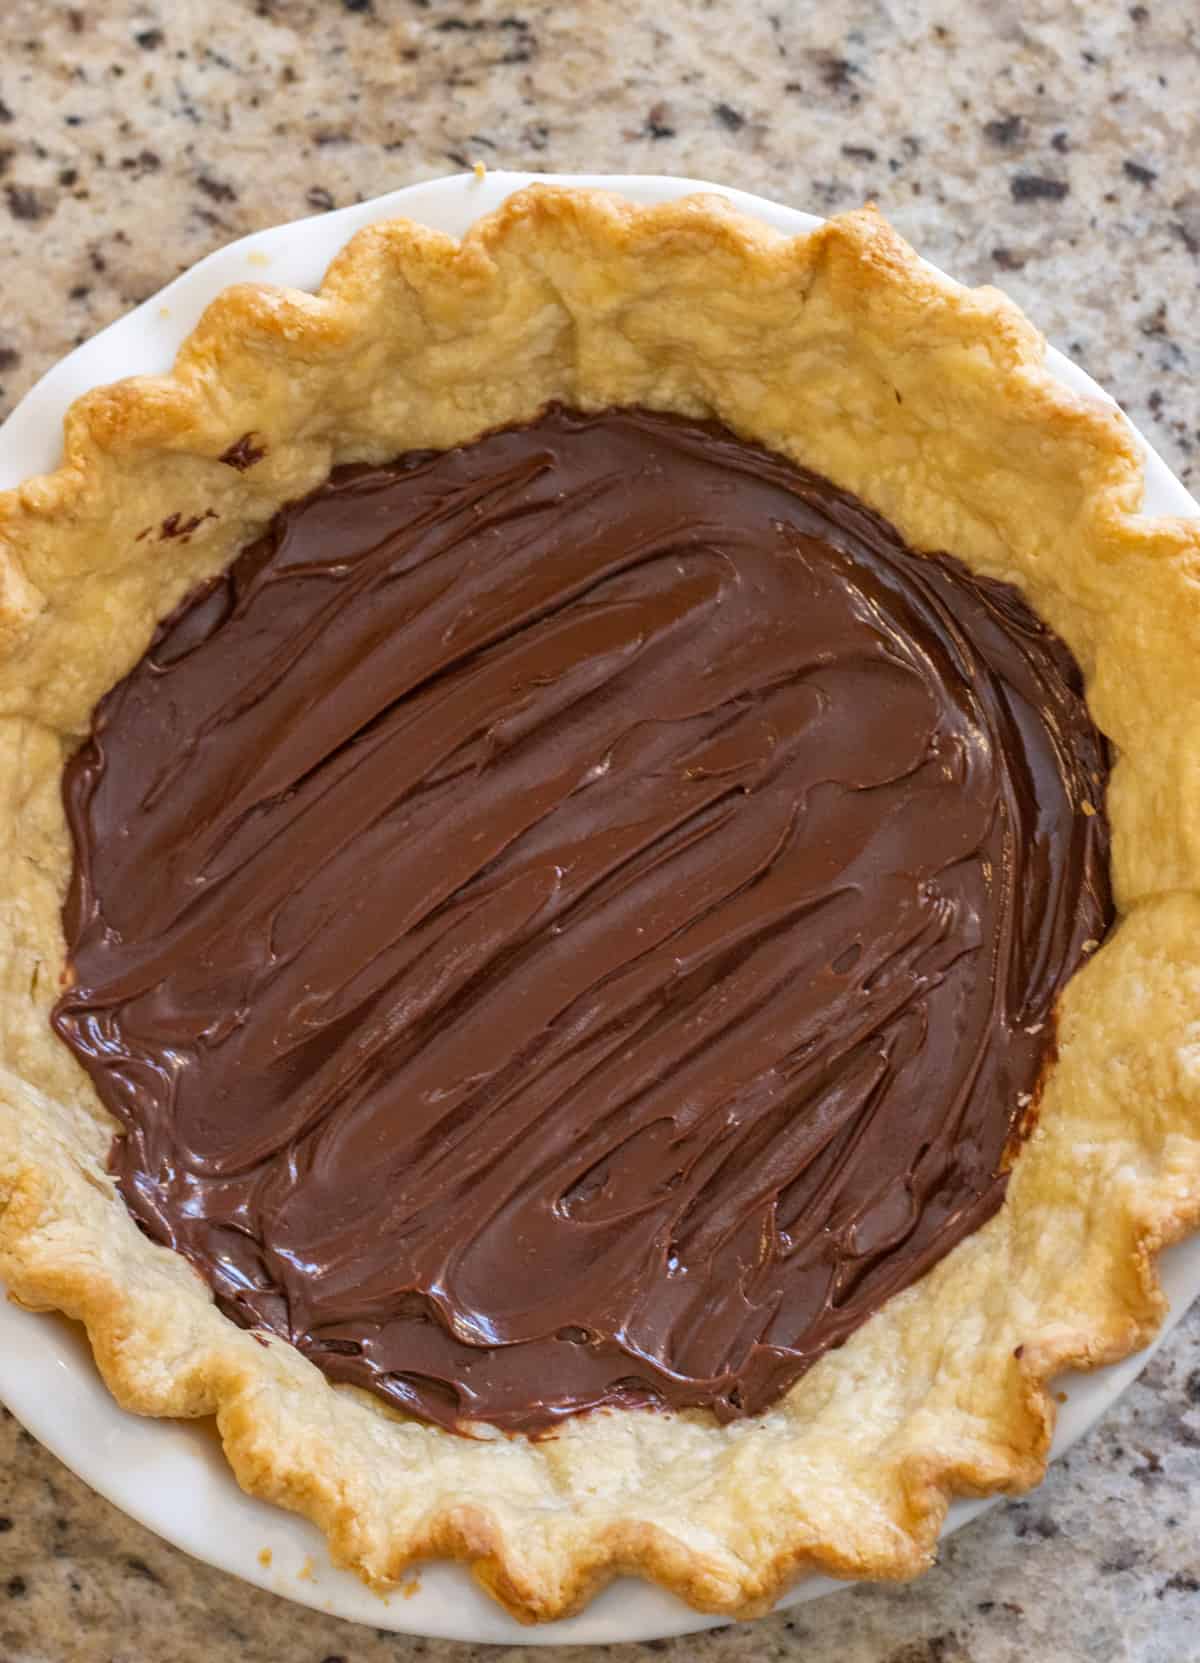 Chocolate ganache spread out in the bottom of a pie crust.